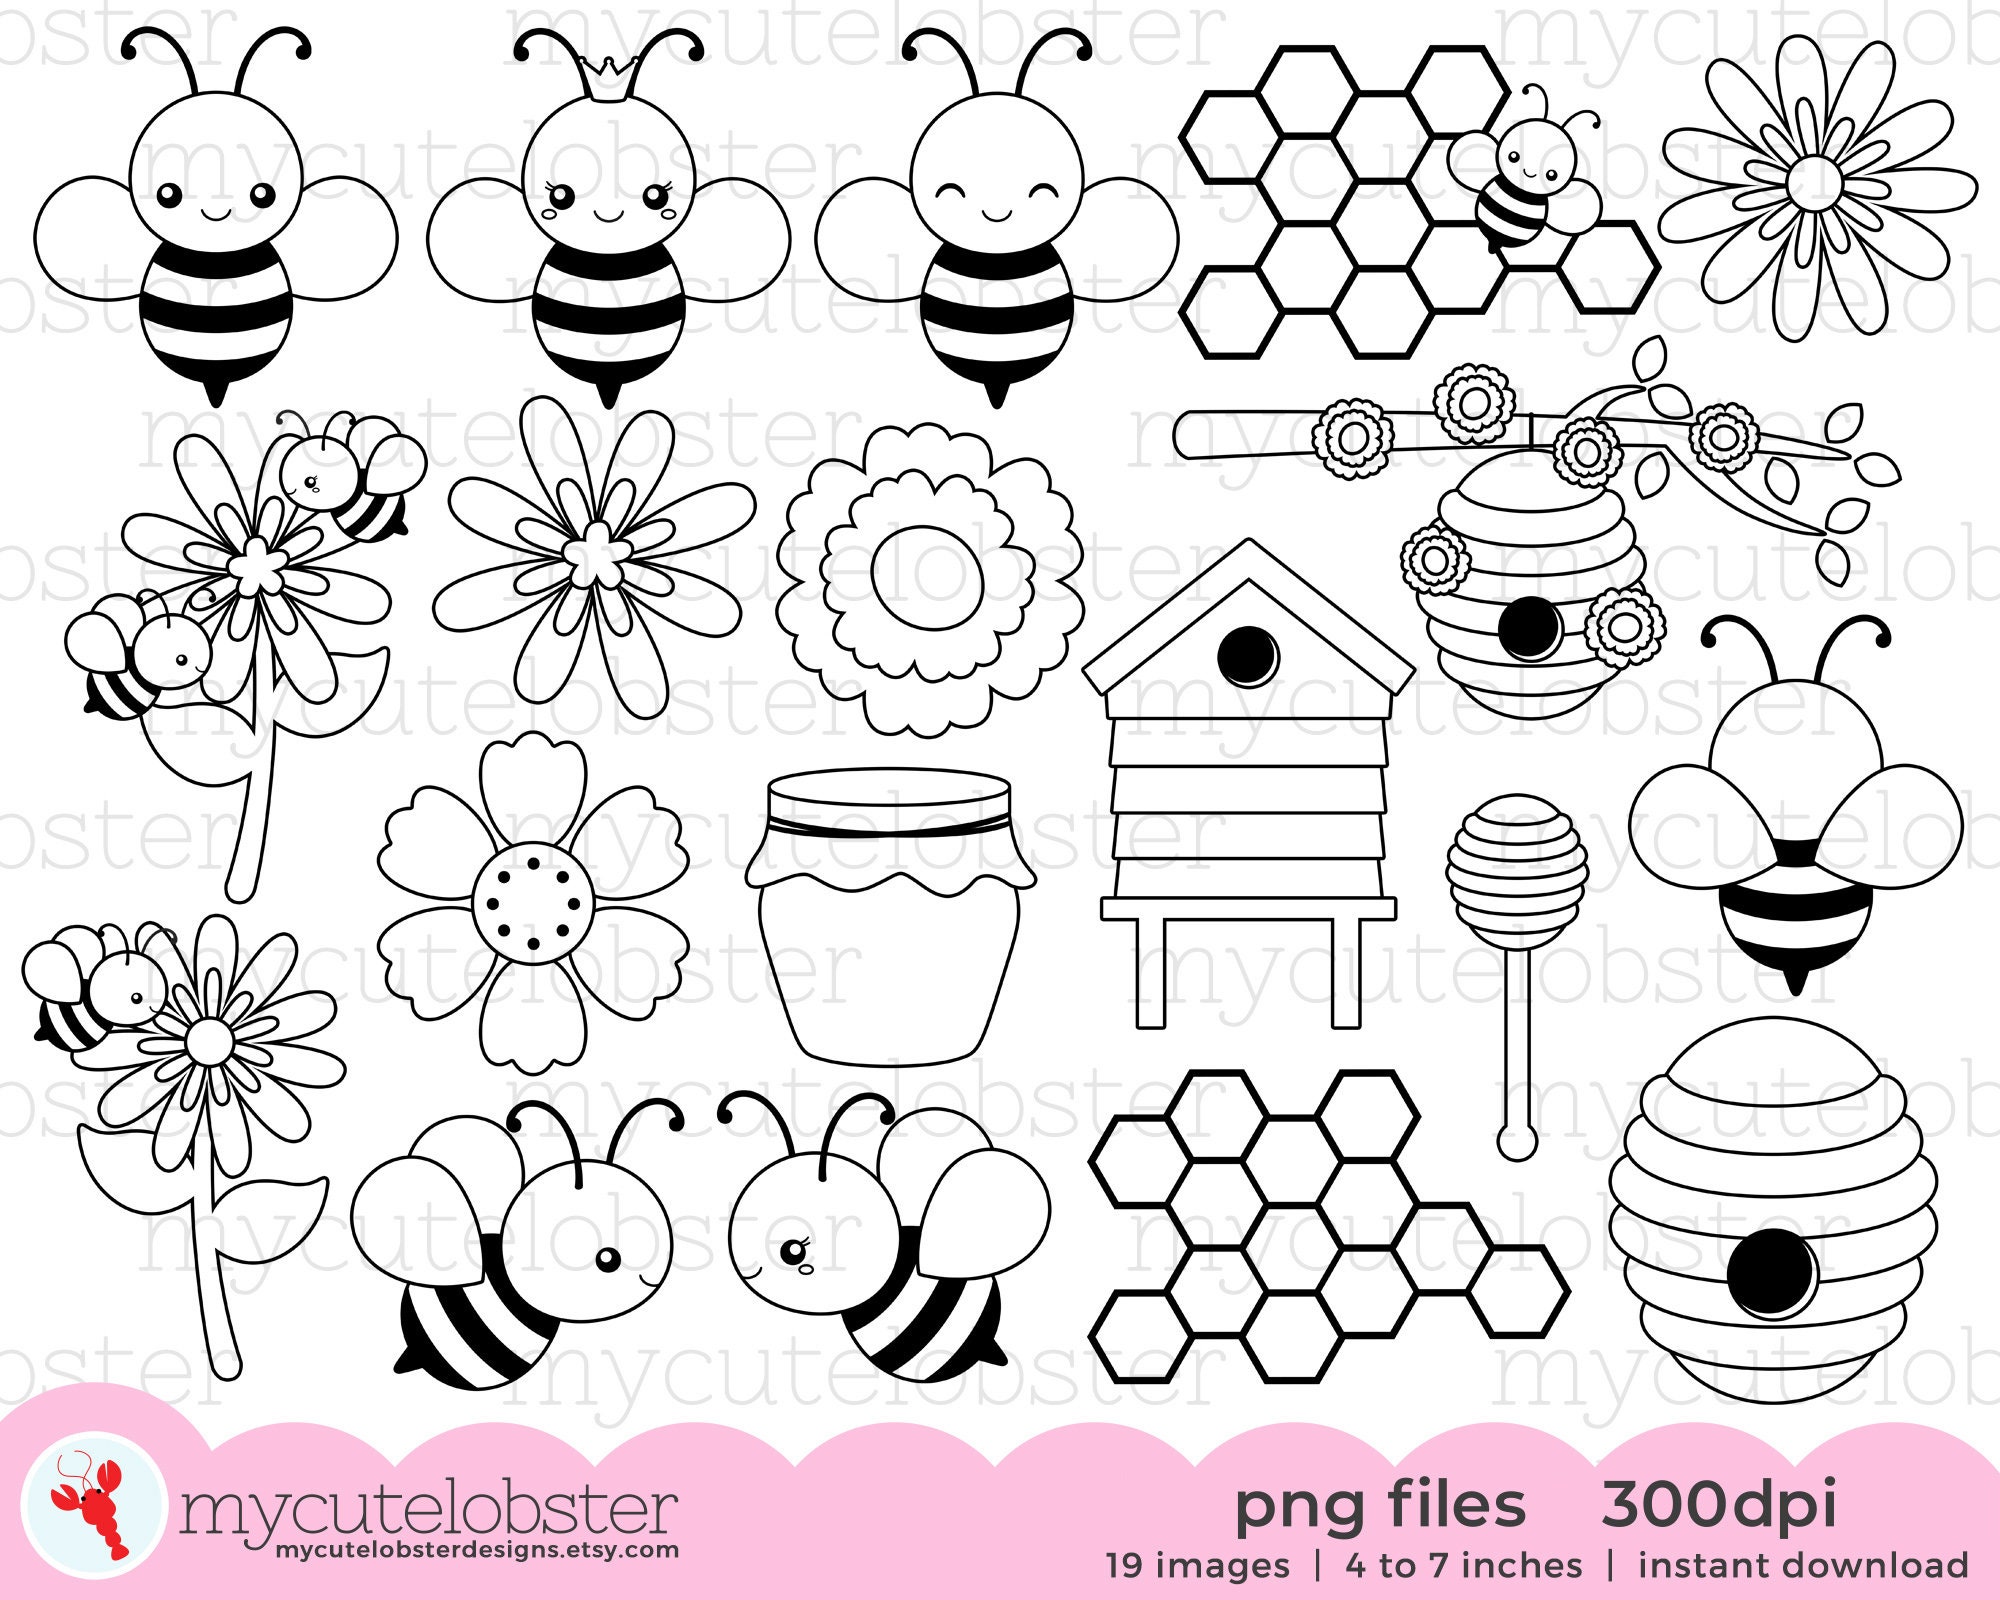 Bumble Bee Gnomes Digital Stamp Graphic by CatAndMe · Creative Fabrica